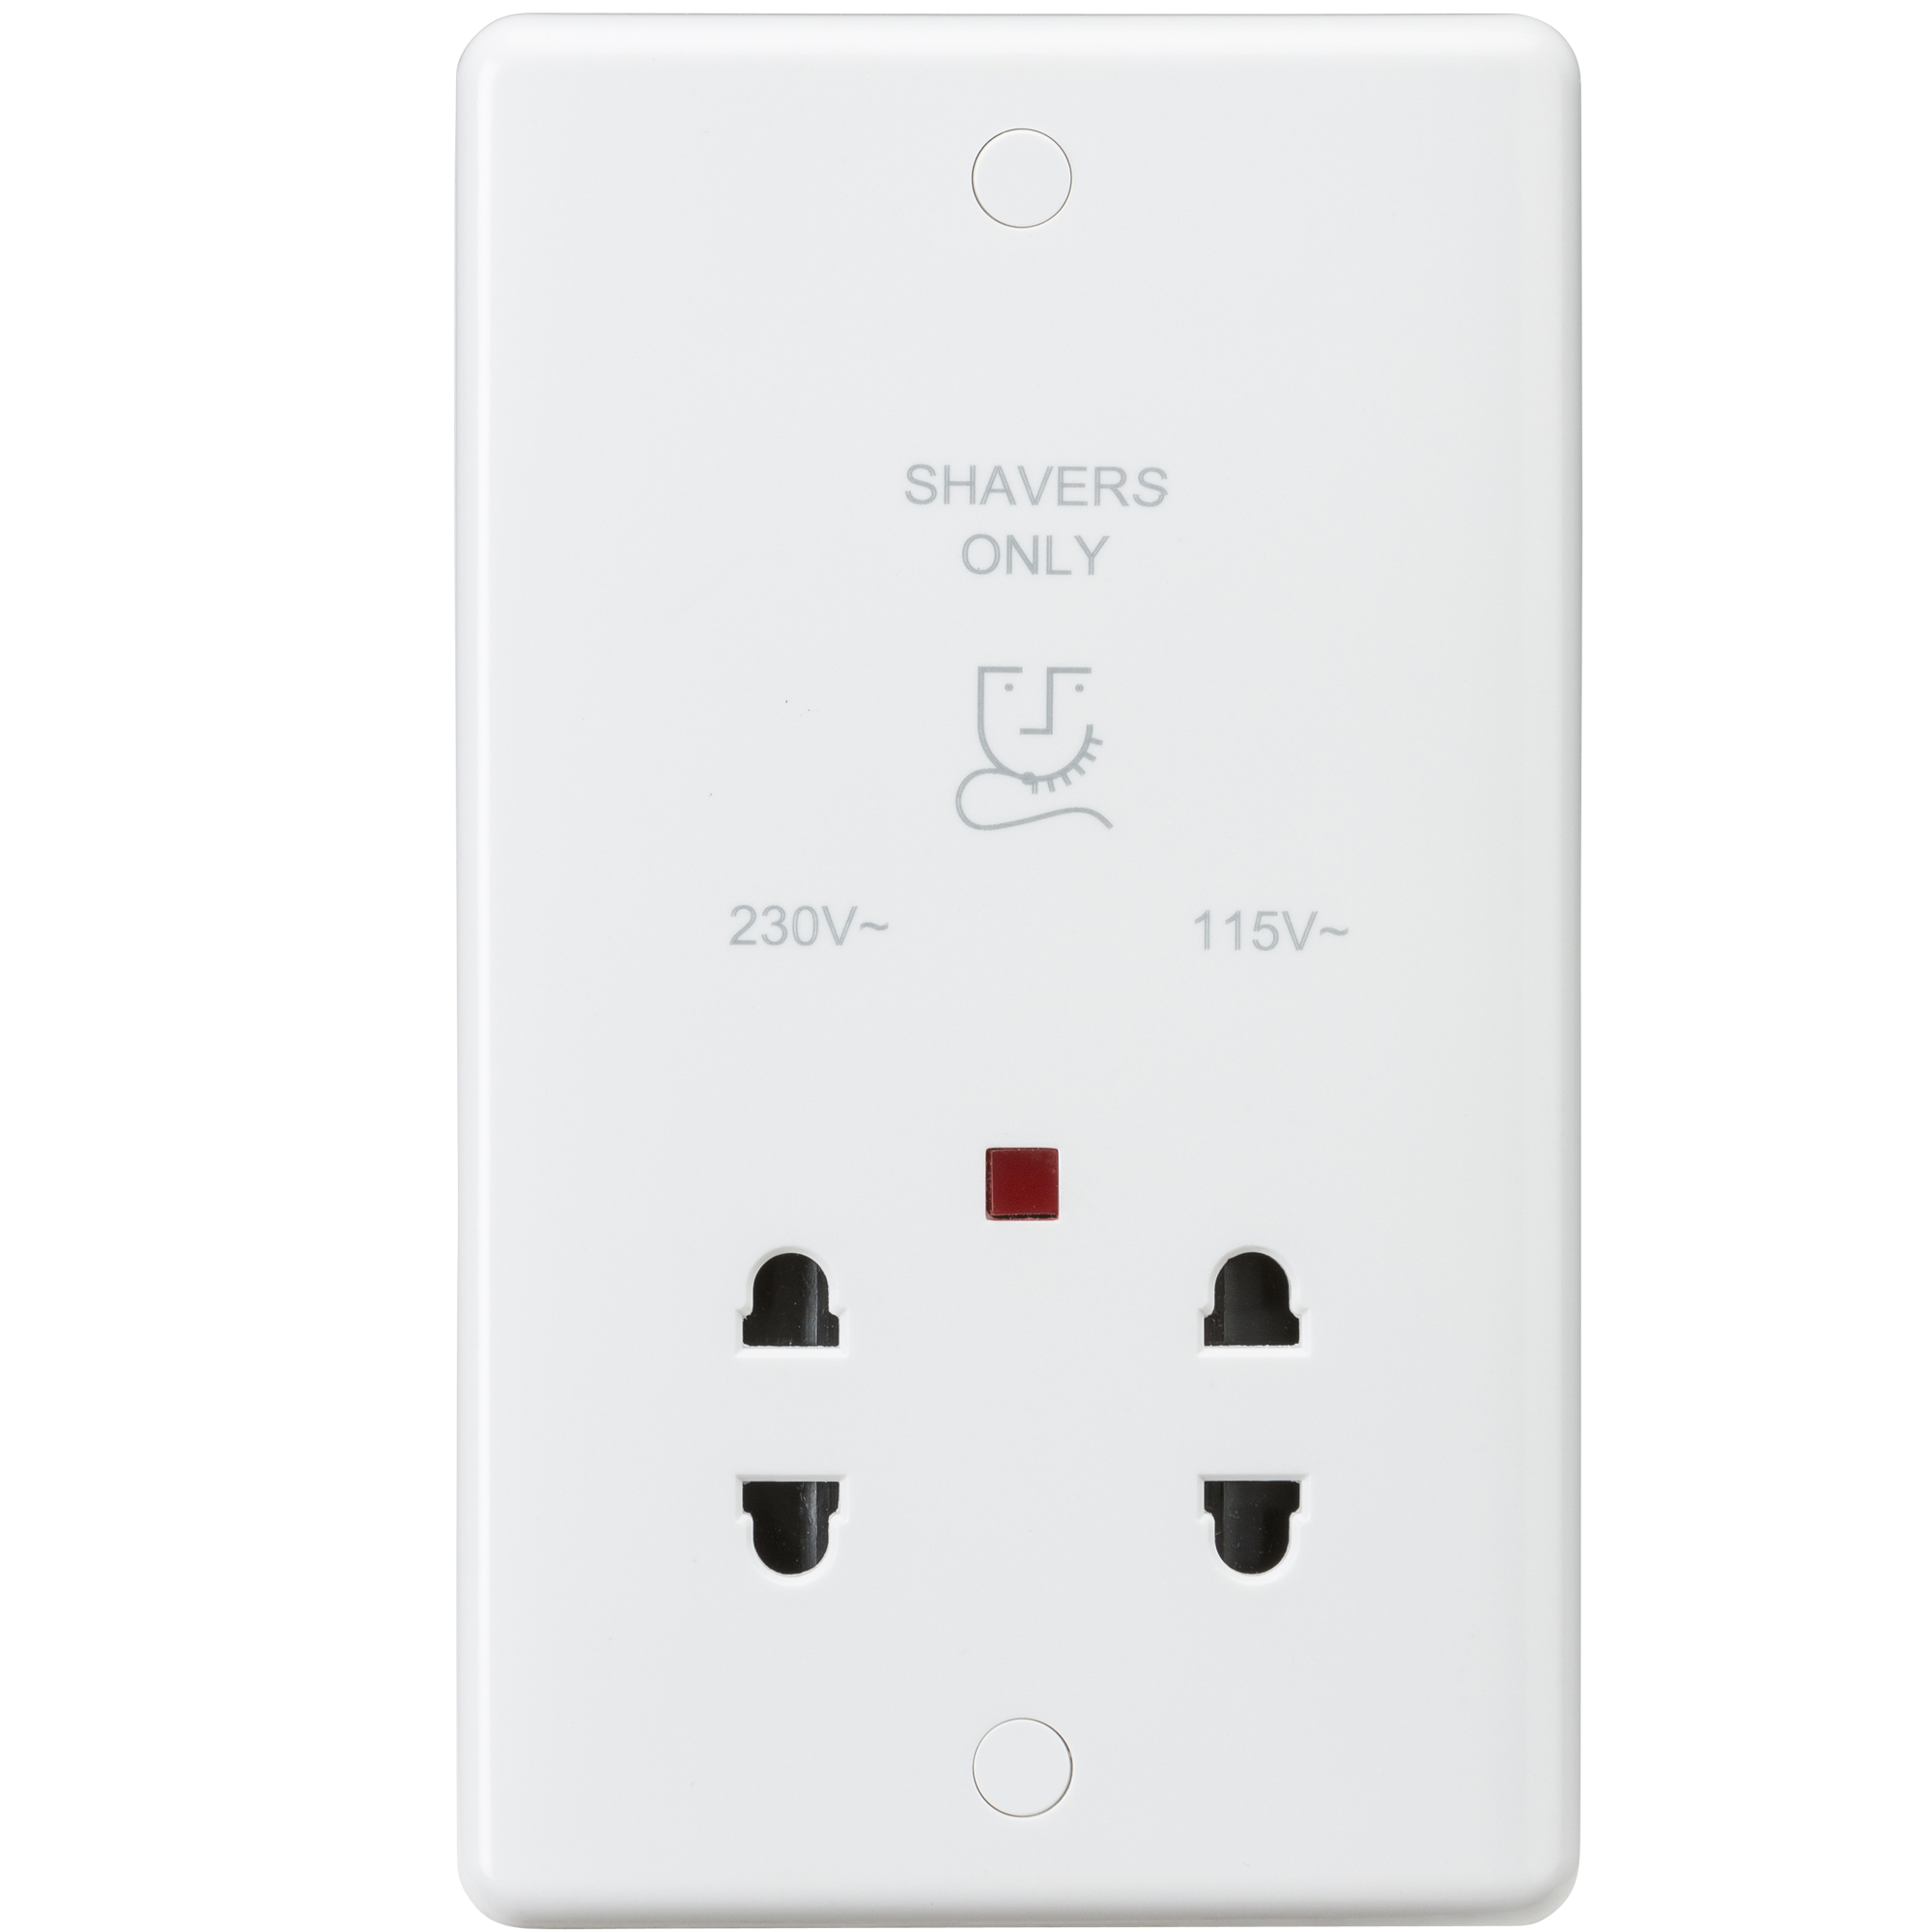 Curved Edge Dual Voltage Shaver Socket With Neon - CU8900N 